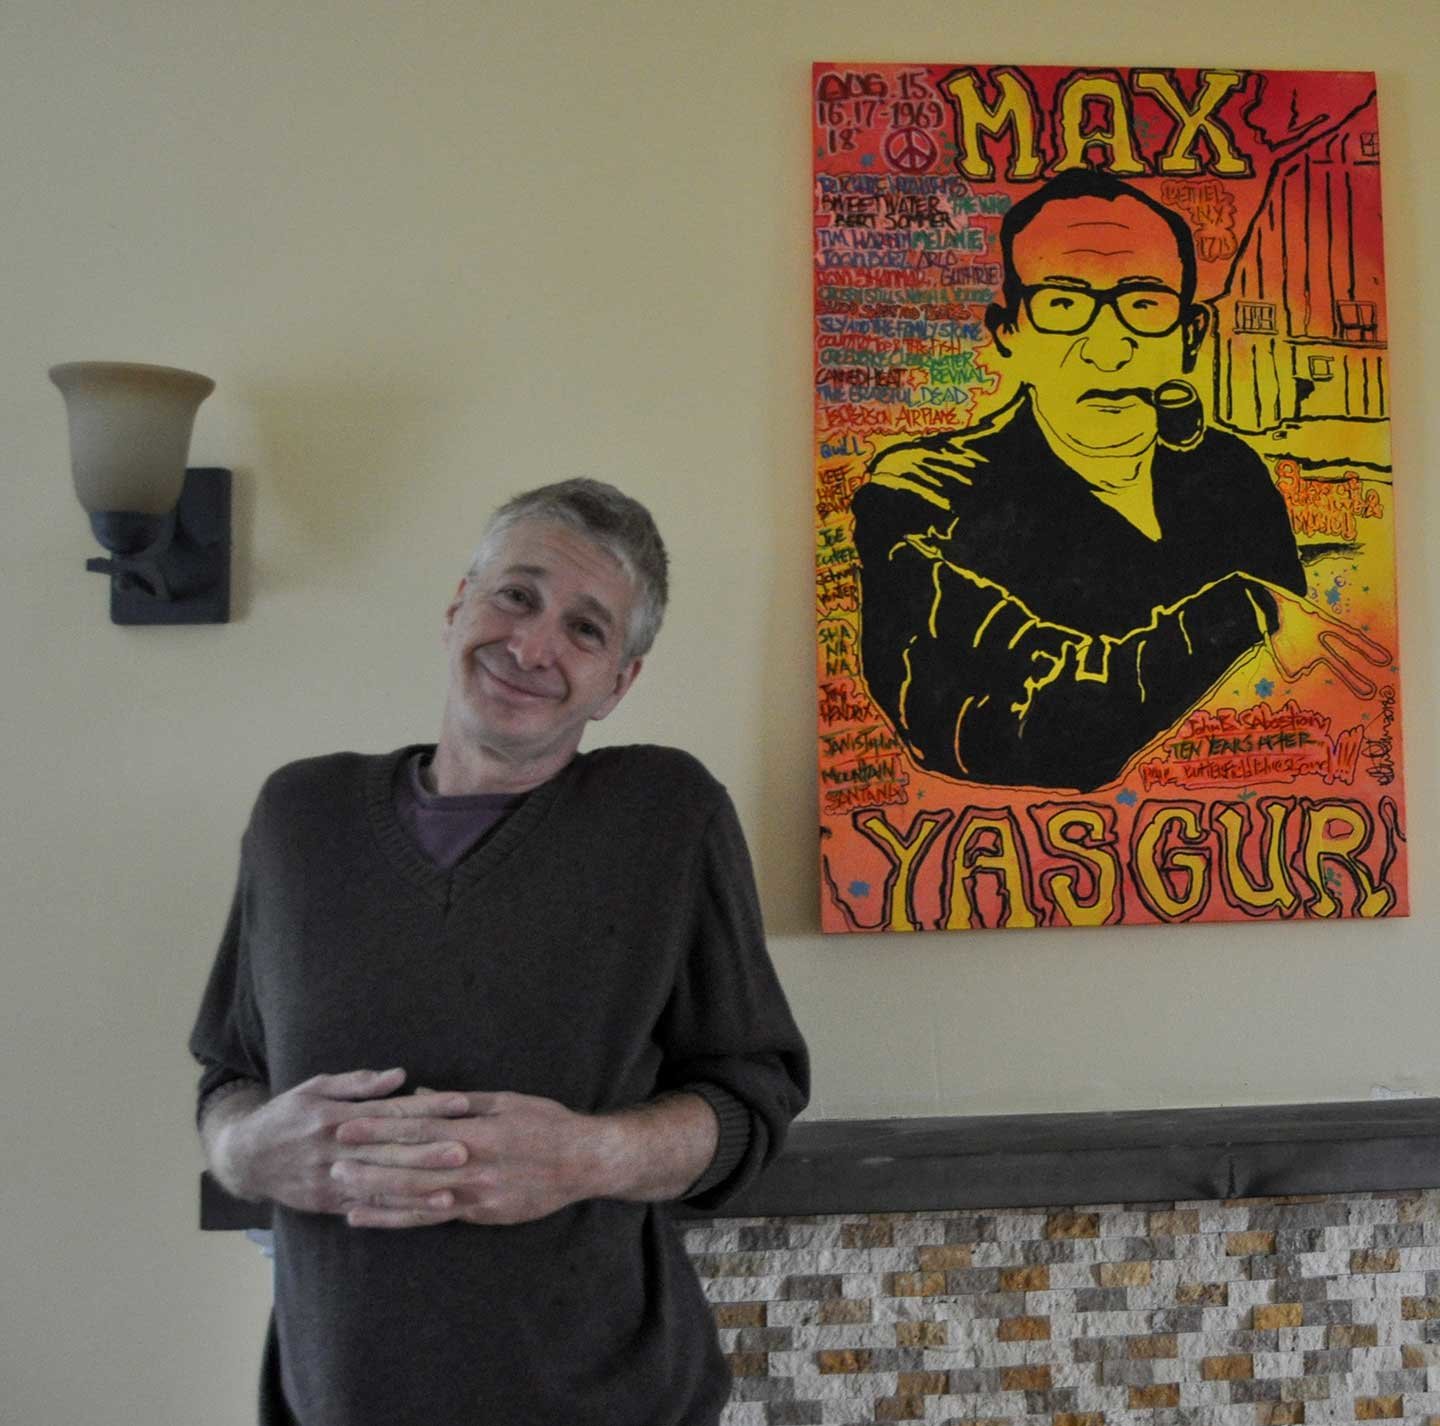 Painter Glenn Gerson has created some artwork, like this portrait of Max Yasgur, specifically for the bed and breakfast in Bethel, NY.